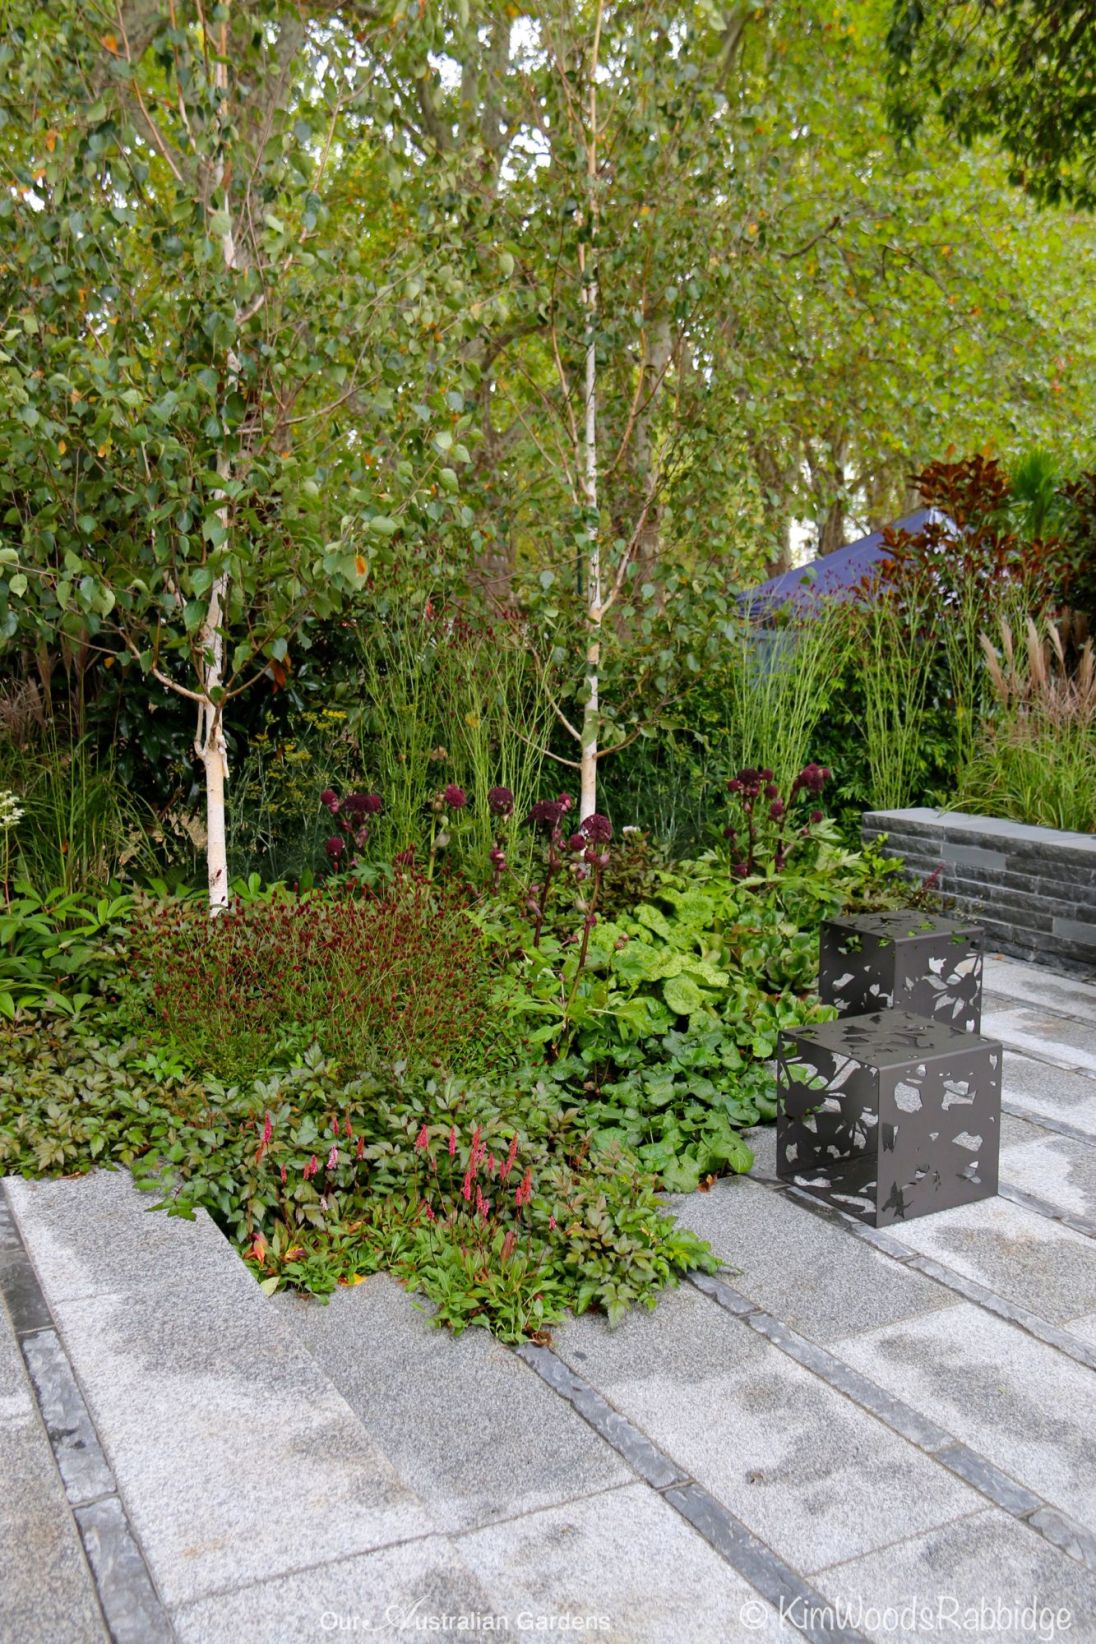 'Granito Grey' paving interspersed with strips of bluestone.